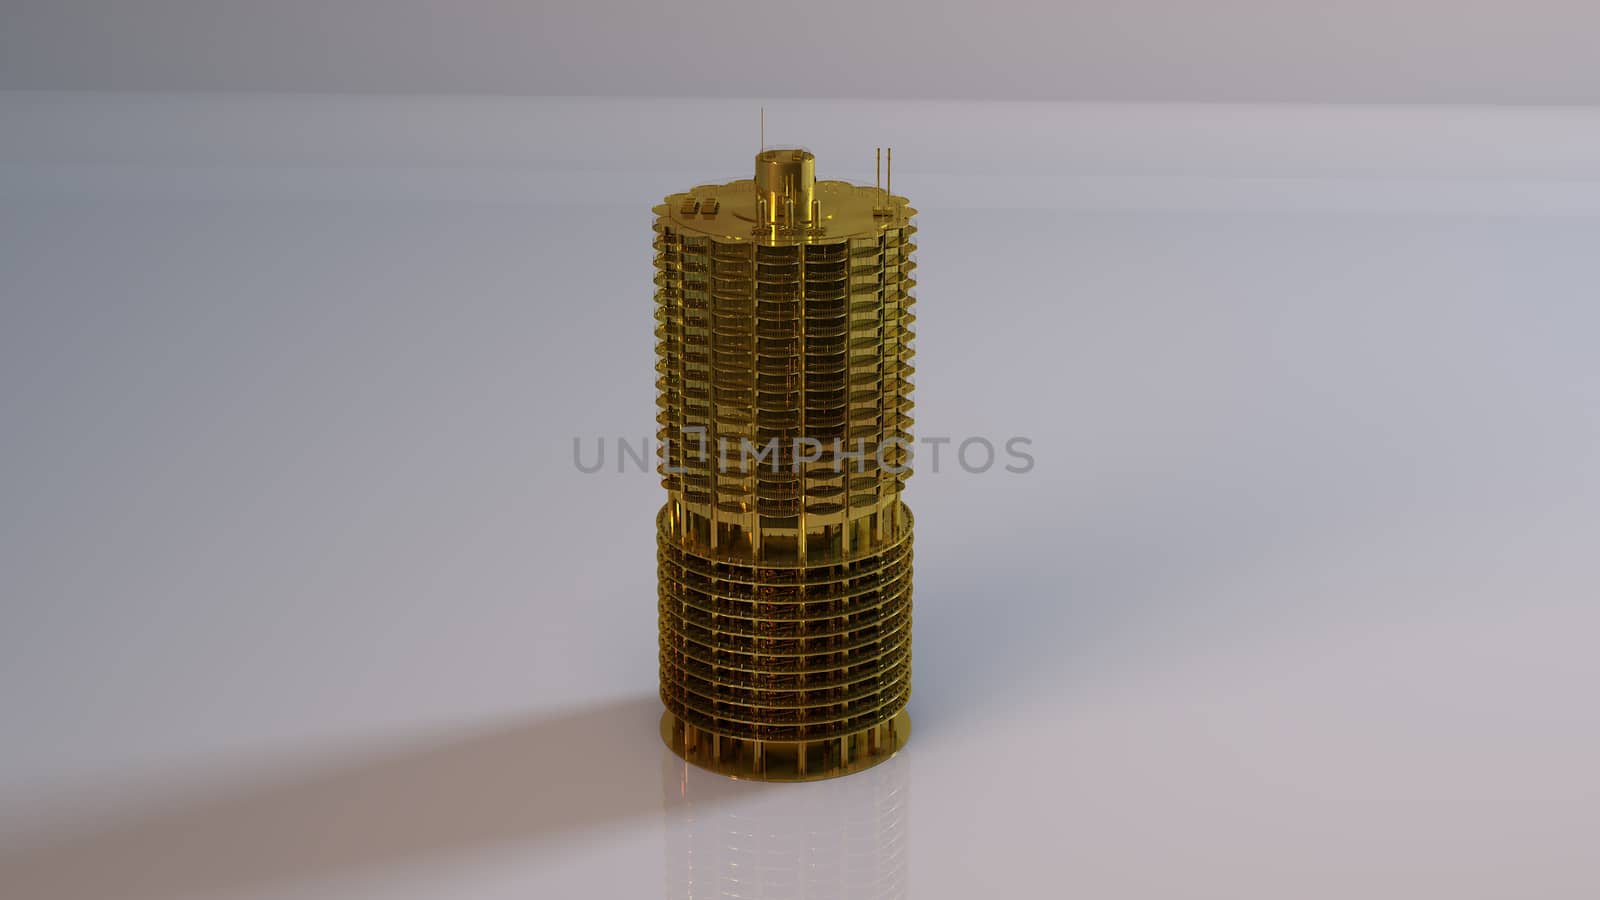 Golden 3D object (detailed tower) by fares139